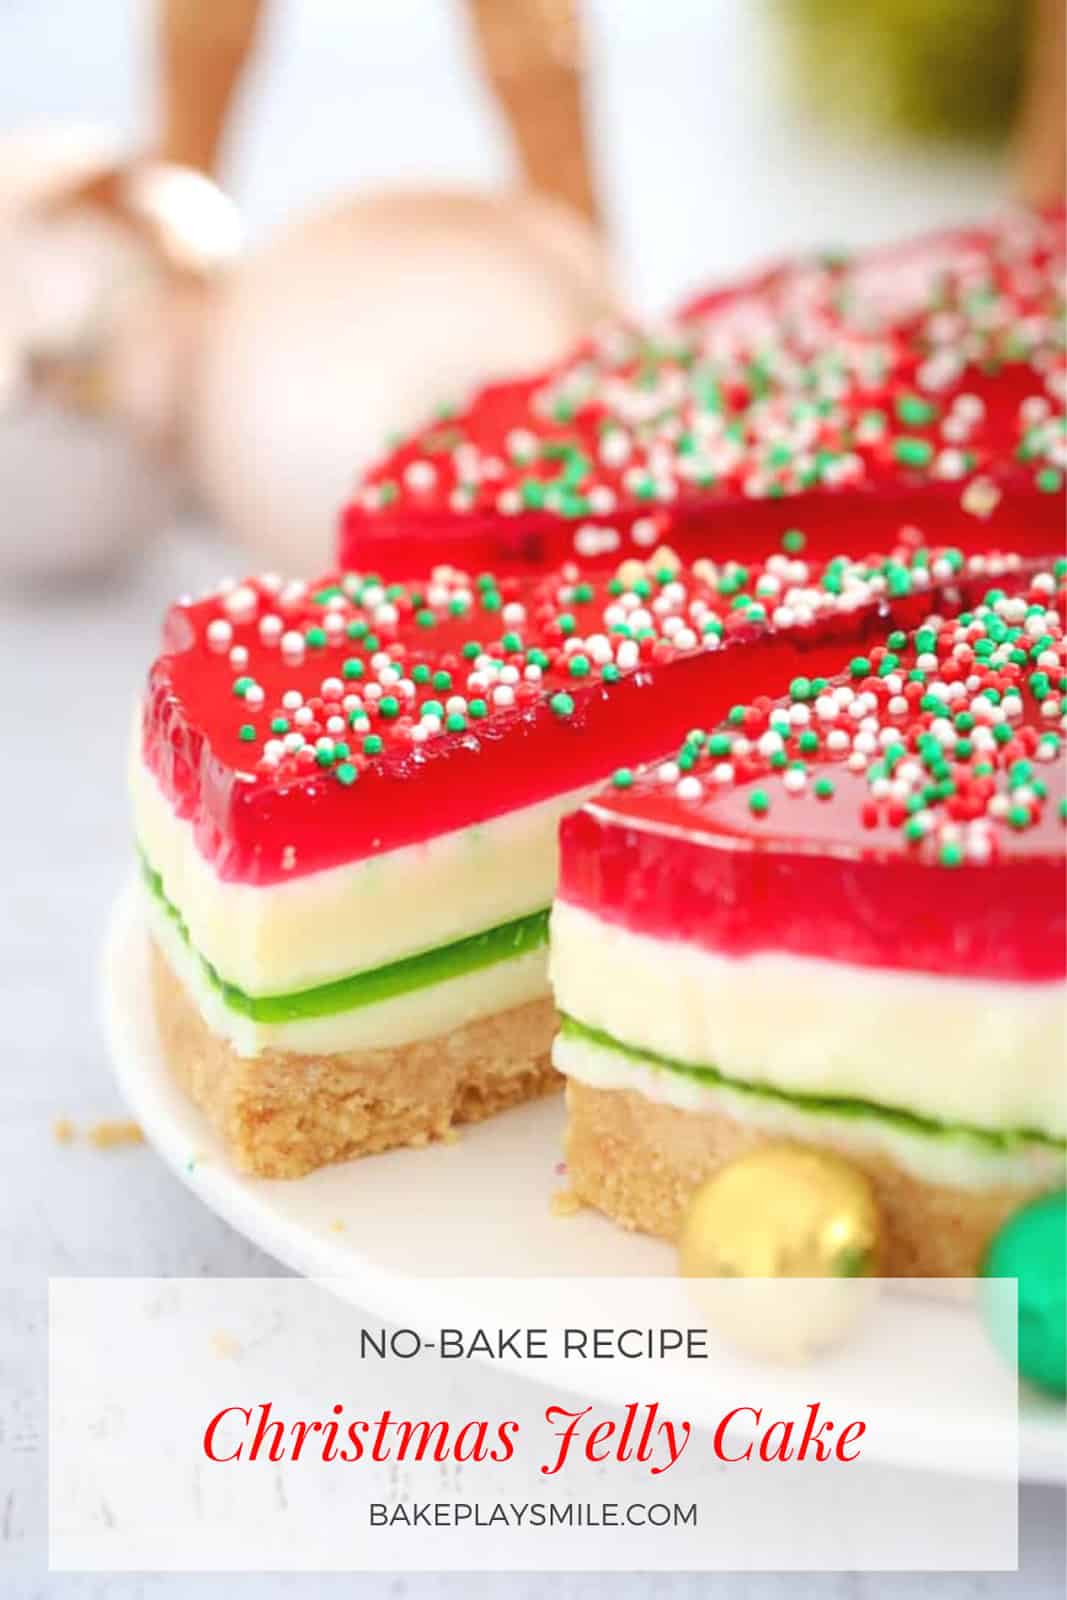 A colourful Pinterest image of a  jelly cake with a Christmas theme of white, red and green layers, decorated with sprinkles and chocolate decorations.